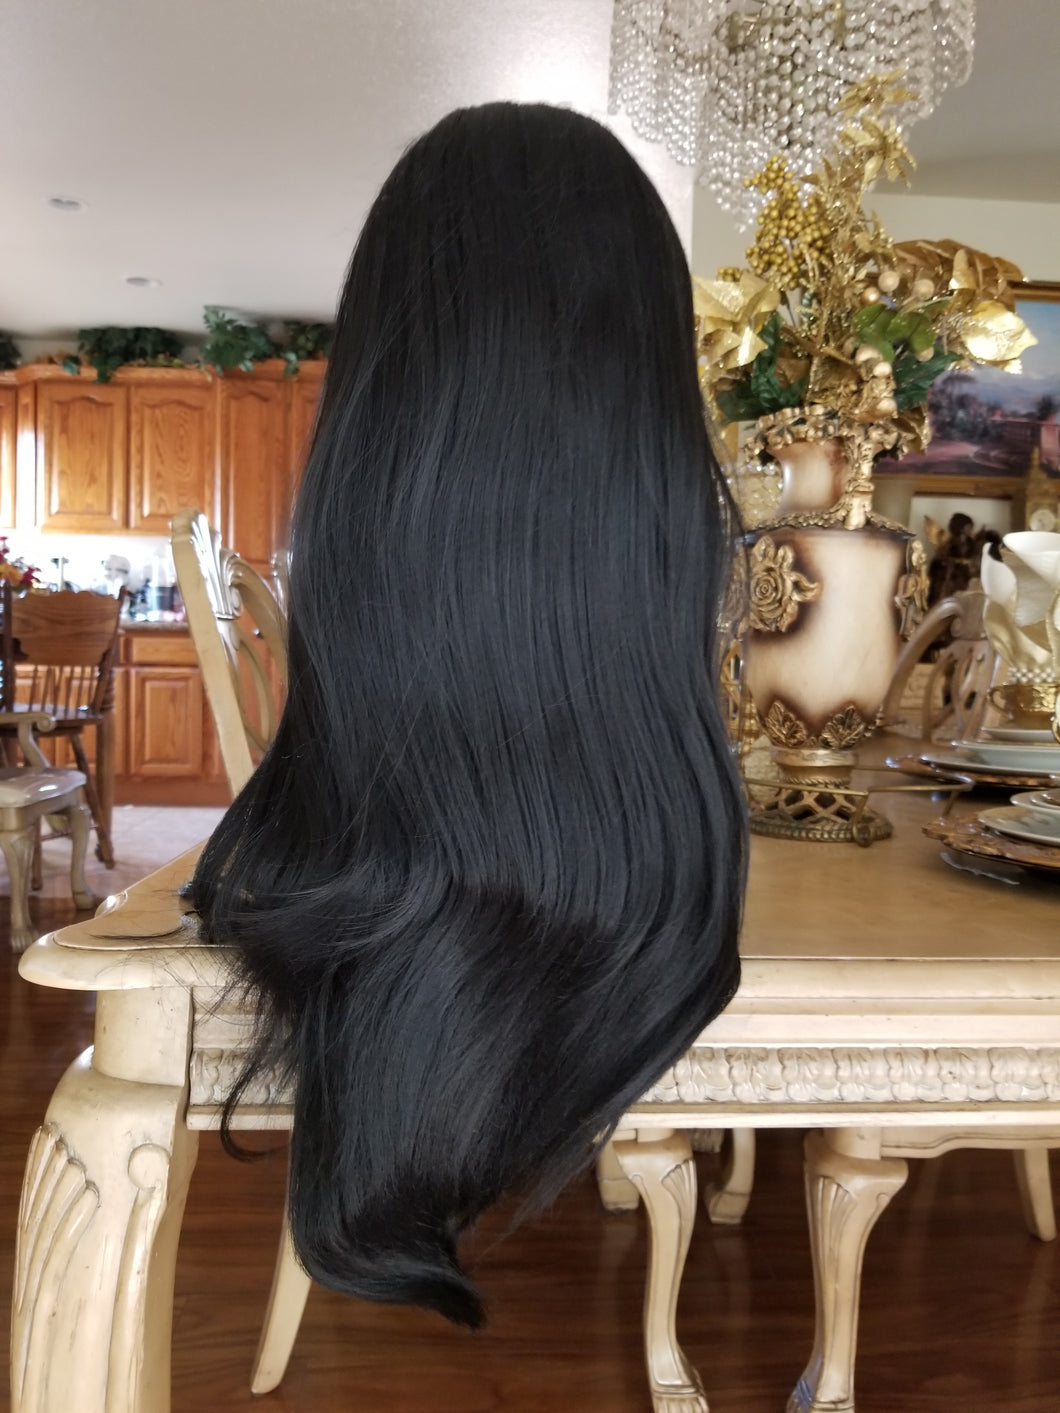 Lace Front Wig 22-24 inches!! - Goddess Beauty Royal Wigs